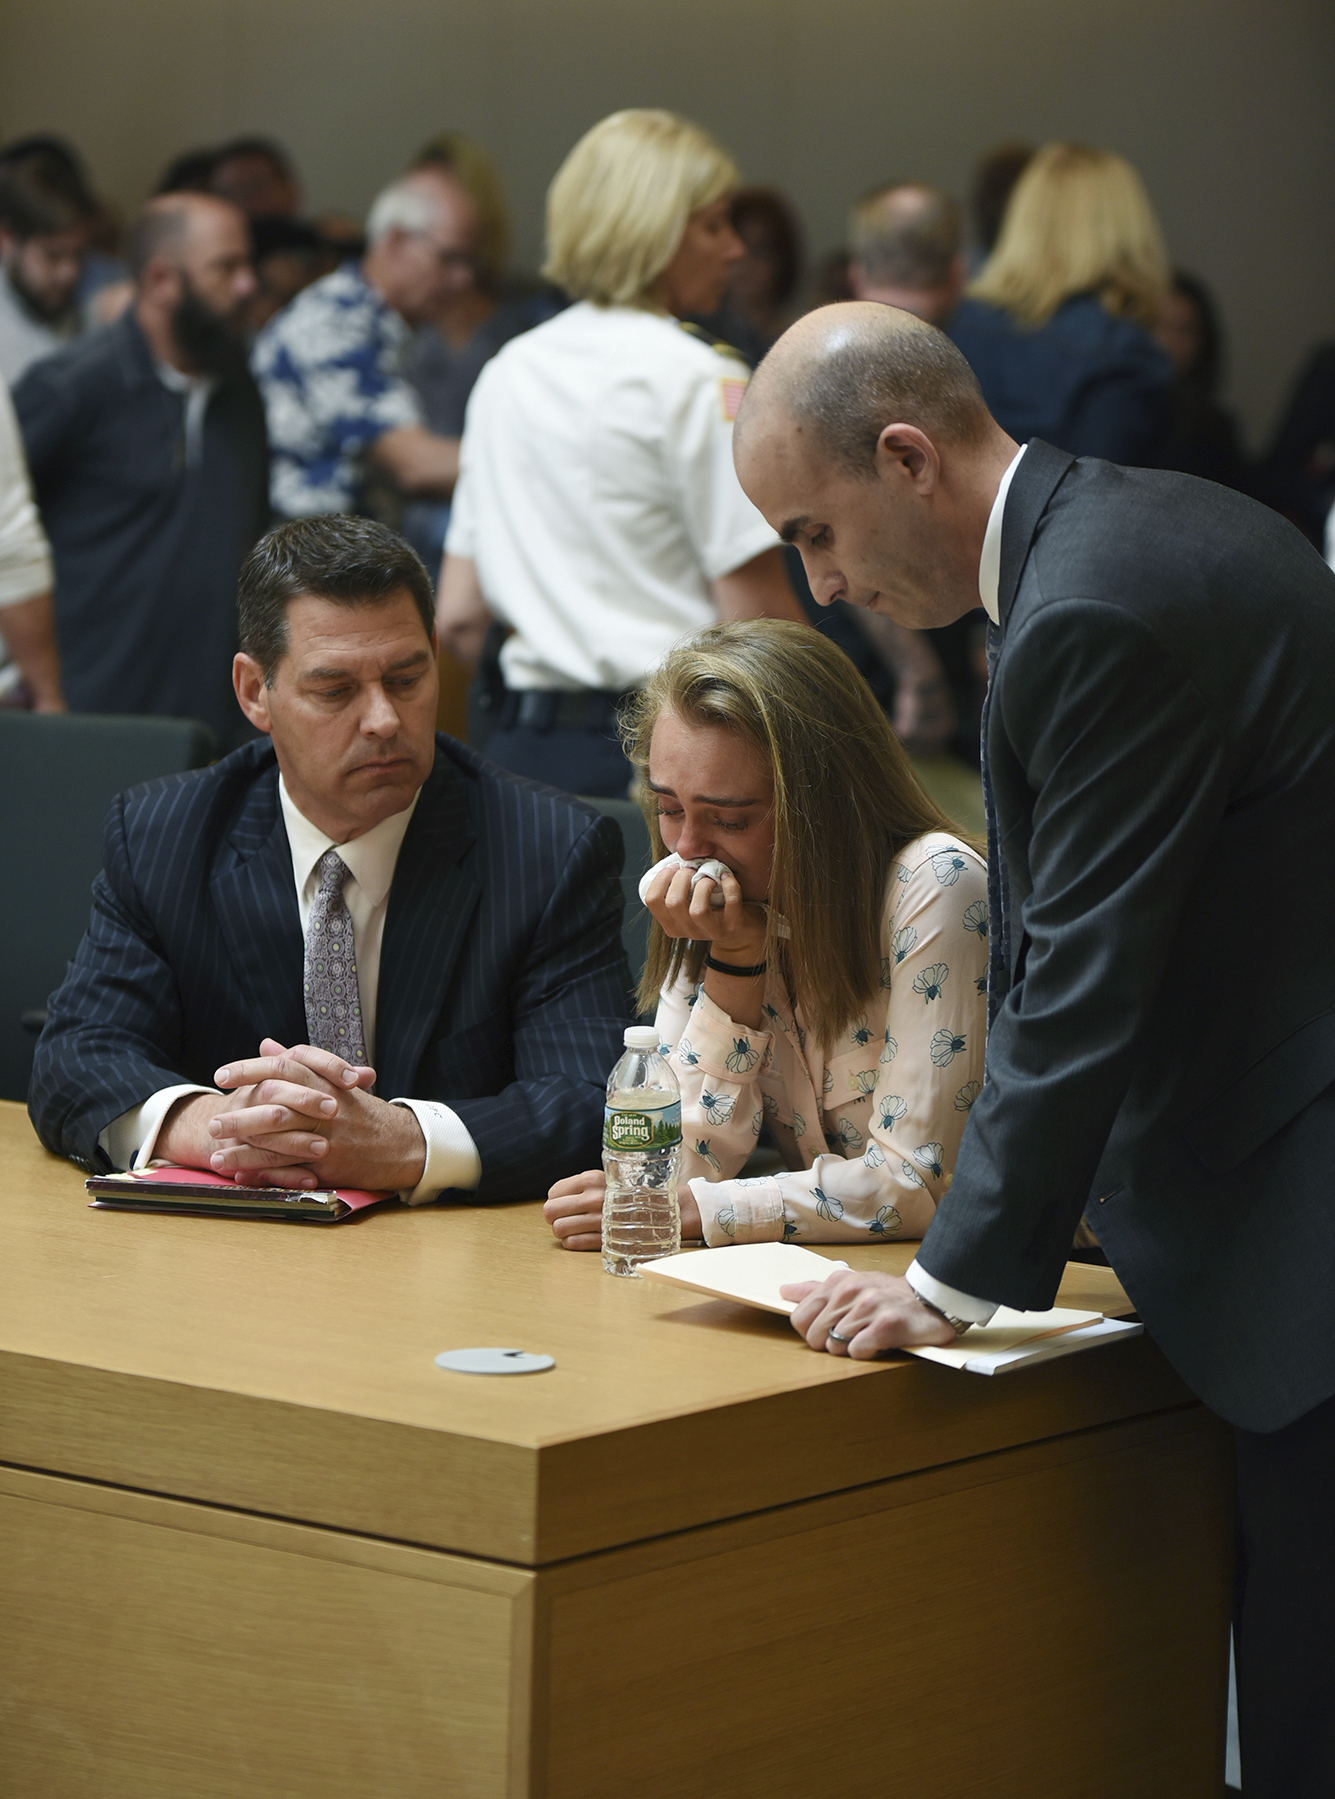 PHOTO: Michelle Carter cries while flanked by defense attorneys Joseph Cataldo, left, and Cory Madera, after being found guilty of involuntary manslaughter in the suicide of Conrad Roy III, June 16, 2017, in Bristol Juvenile Court in Taunton, Mass.